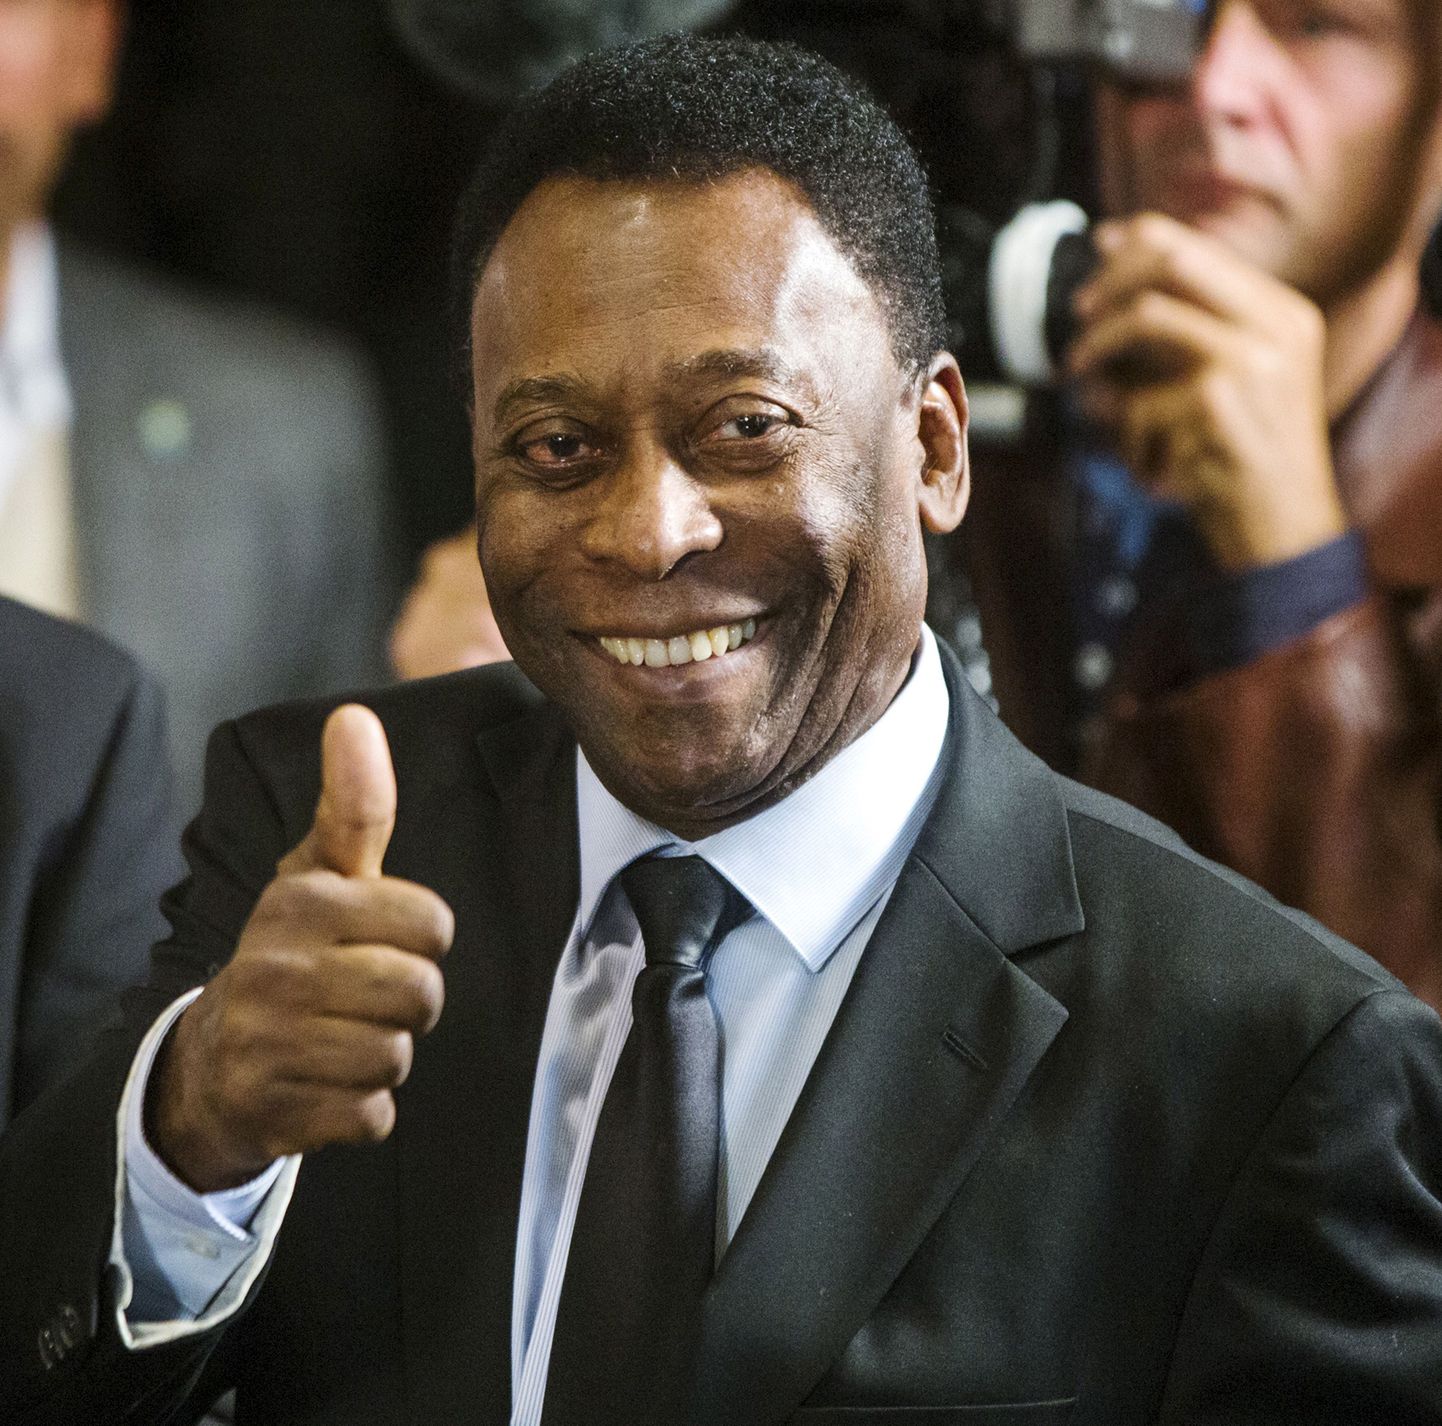 Former Brazilian soccer star Pele poses for photograph after he ceremonially turned on the lights of the Empire State Building during an event to celebrate the start of the New York Cosmos 2015 season, in New York in this April 17, 2015 file photo.  Pele has undergone prostate surgery and is in stable condition, a Sao Paulo hospital said on May 7. This is the second time Pele, 74, has been hospitalized in six months. In a statement, the Albert Einstein Hospital said Pele had undergone a transurethral resection of the prostate. According to the U.S. National Institutes of Health's website, the procedure involves removing an internal part of the prostate gland in order to treat an enlarged prostate.  REUTERS/Lucas Jackson/Files